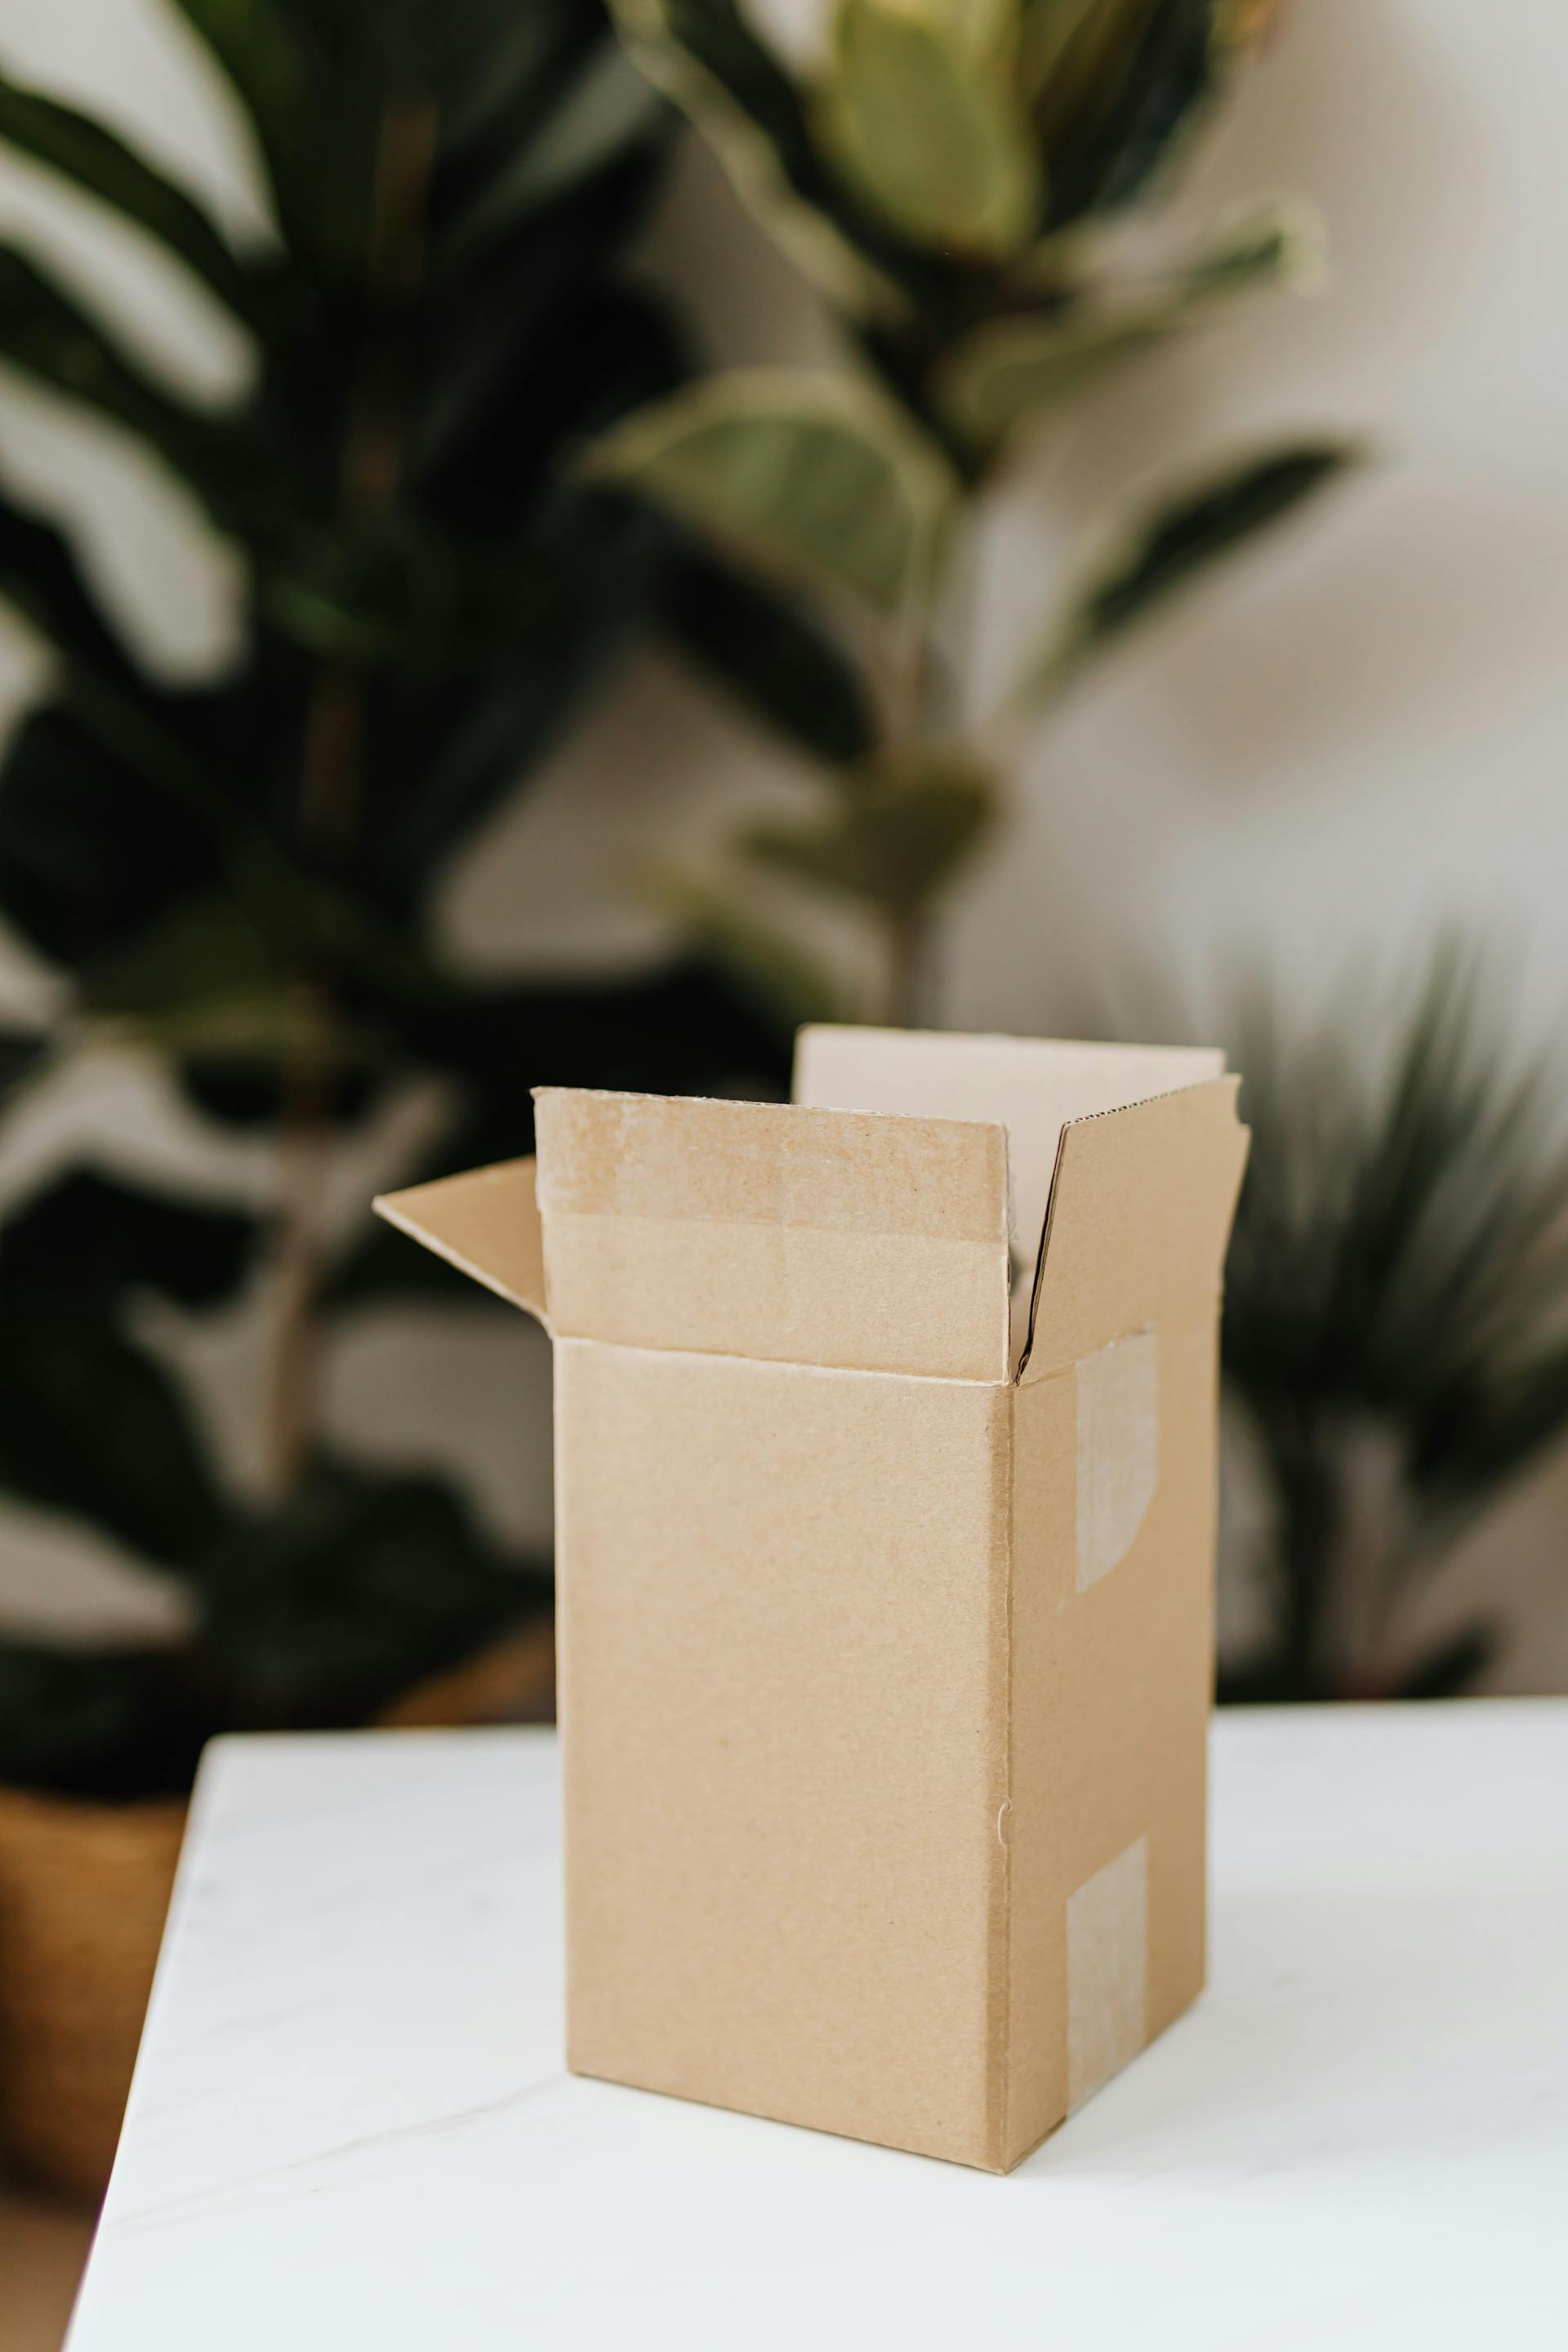 A cardboard box on a table | Source: Pexels